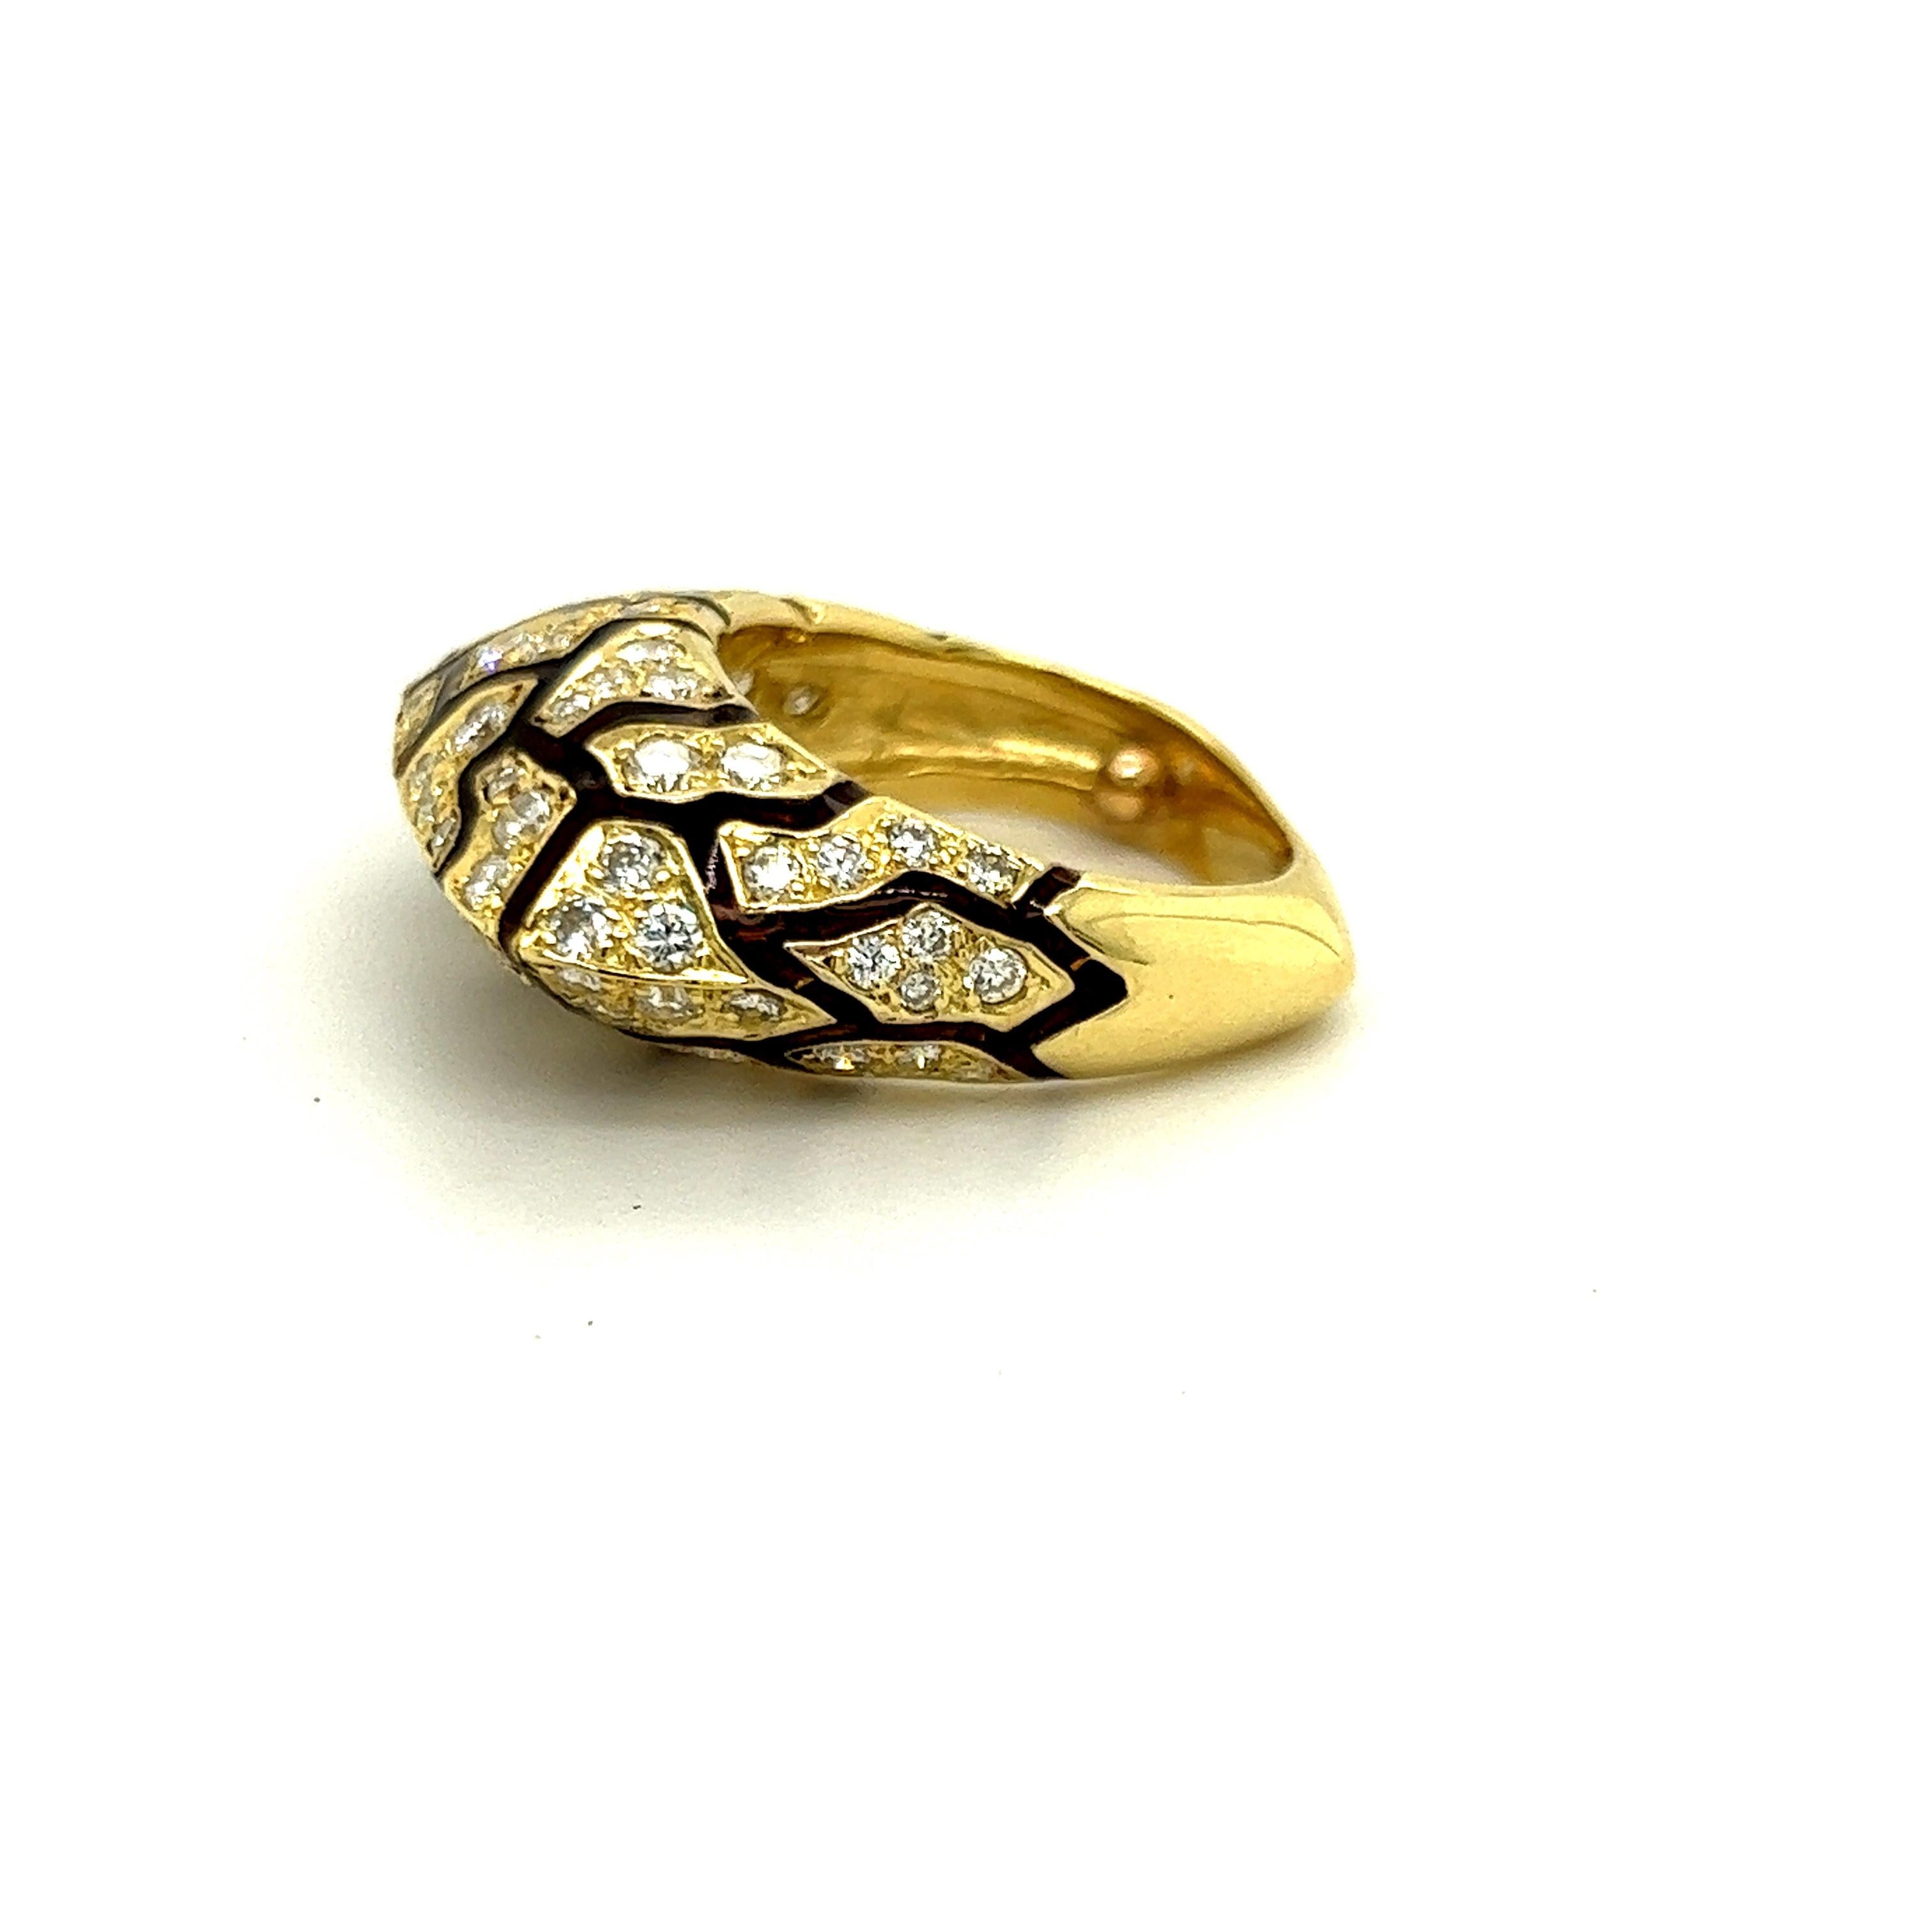 18K Yellow Gold Diamonds Brown Enamel Zebra Style Ring

Brown enamel is done between the diamond sections. 

Apprx. 1.5ct. diamonds total weight.

0.40 inch width 

Ring is 5. Sizeable by request. 

Ring has two balls that can be removed if needed.

